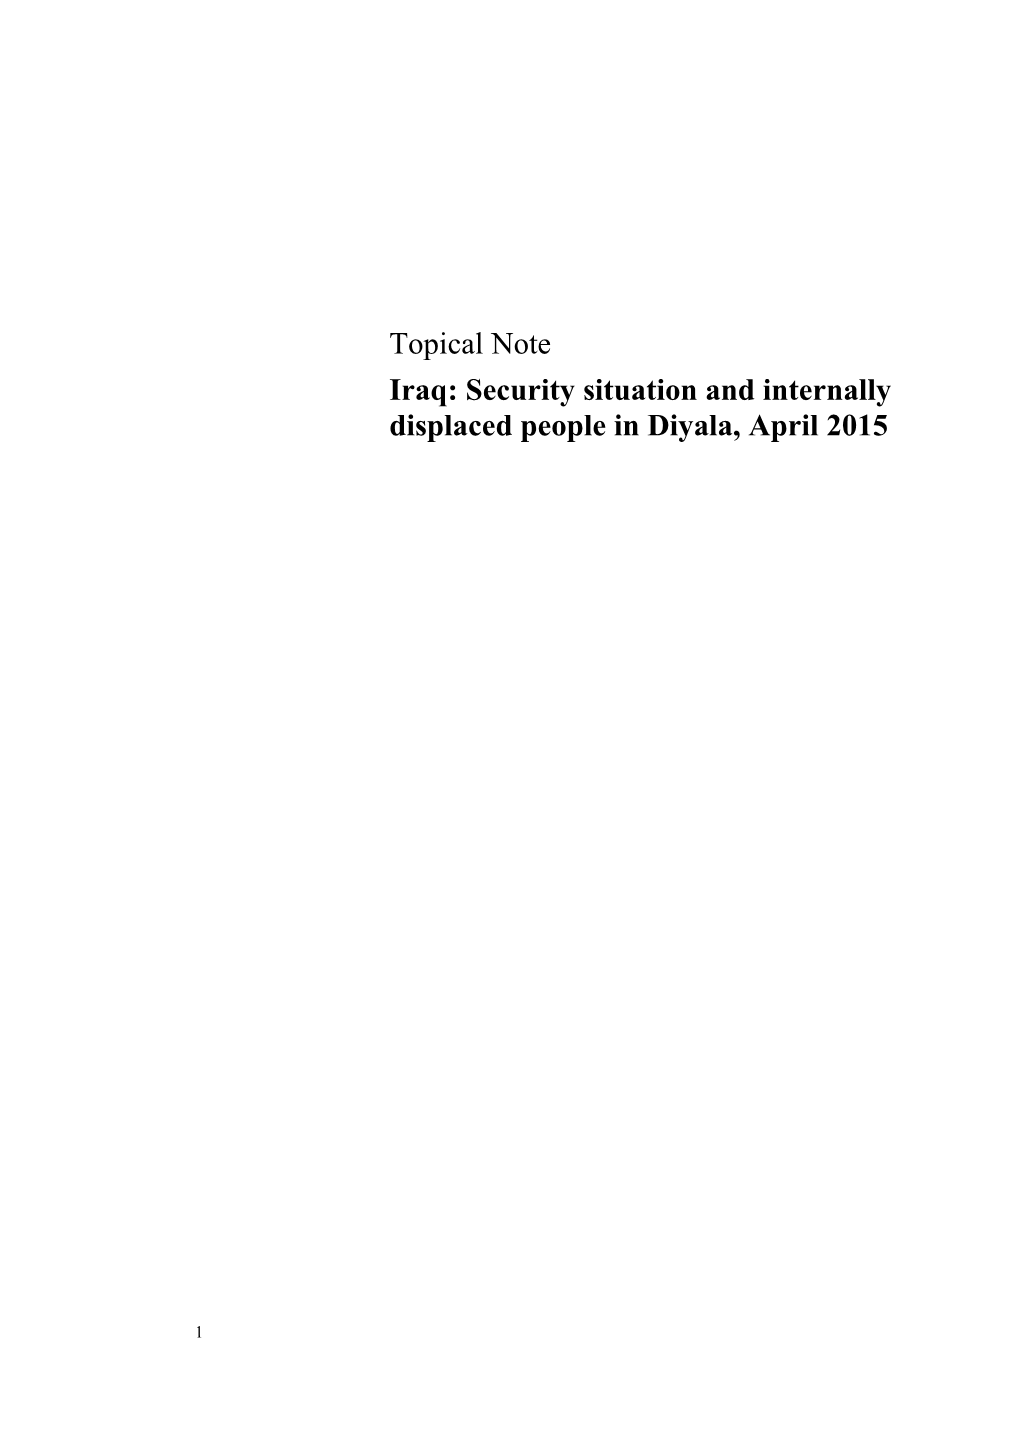 Security Situation and Internally Displaced People in Diyala, April 2015